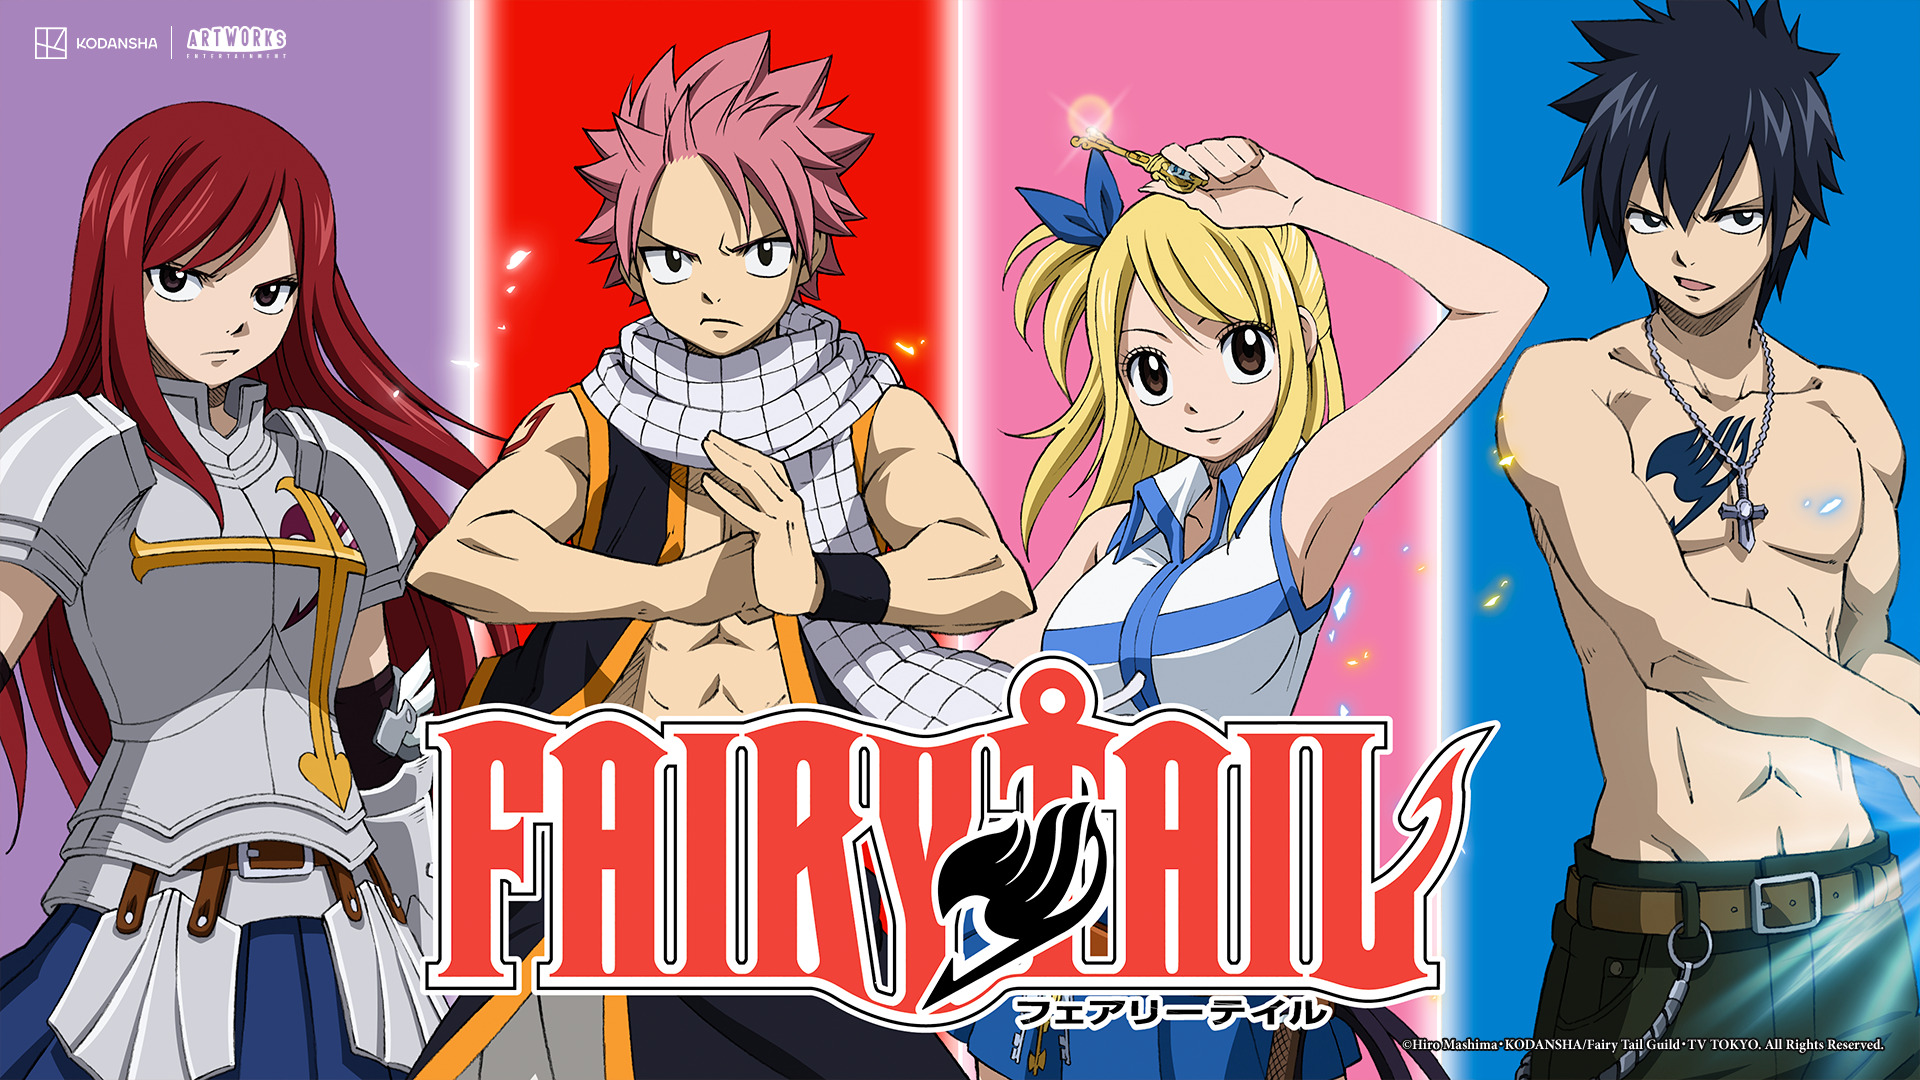 Top 15 Strongest Women in Fairy Tail Series » Anime India-demhanvico.com.vn